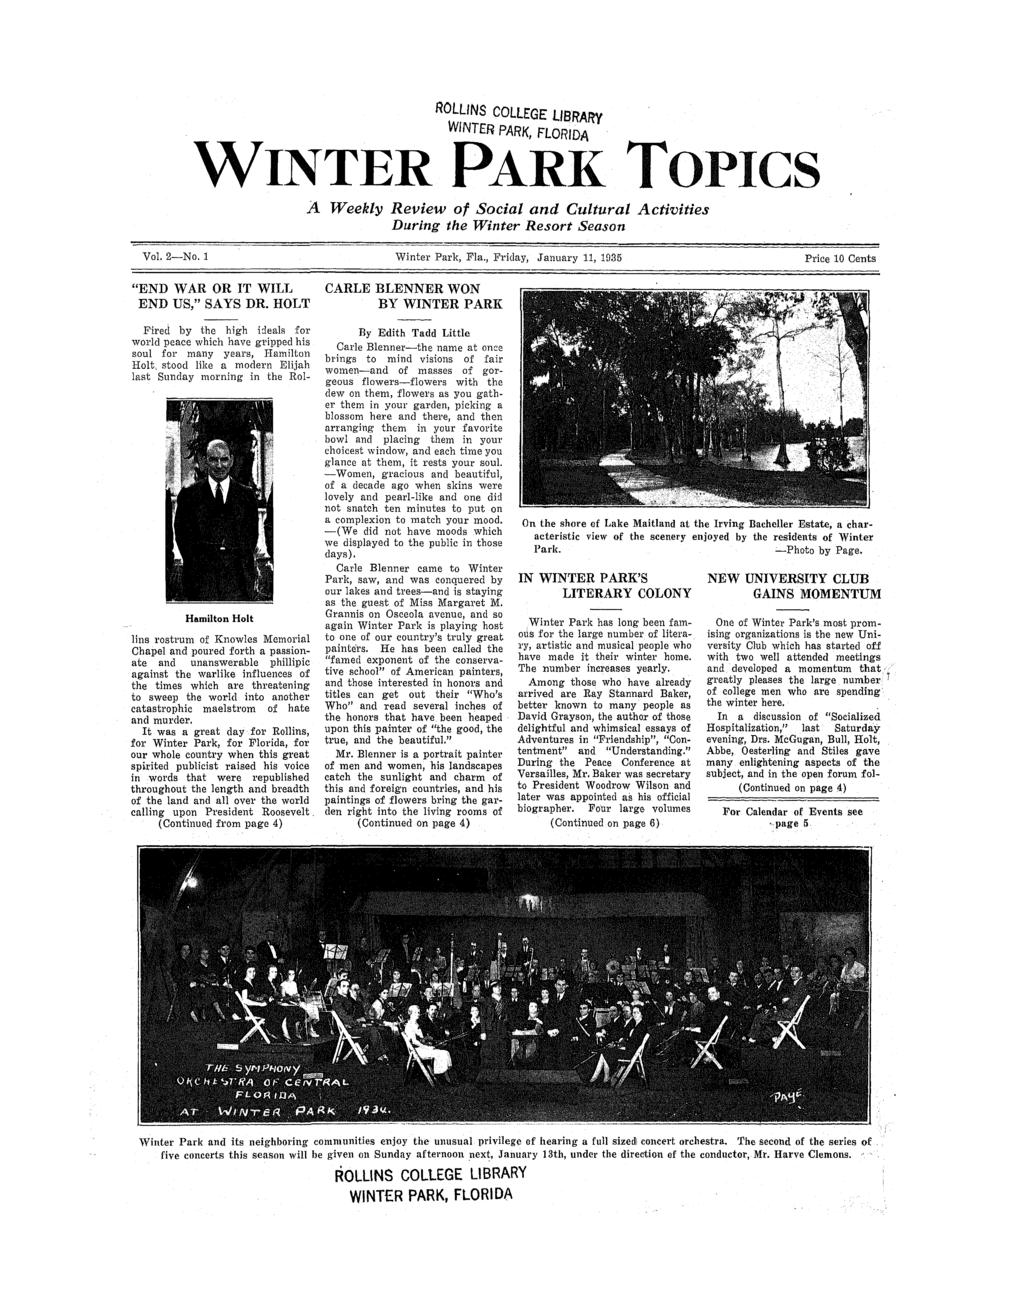 ROLLNS COLLEGE LBRARY WNTER PARK, FLORDA WNTER PARK TOPCS A Weekl Revew of Socal and Cultural Durng the Wnter Resort Season Actvtes Vol. 2 No. 1 Wnter Park, Pla.